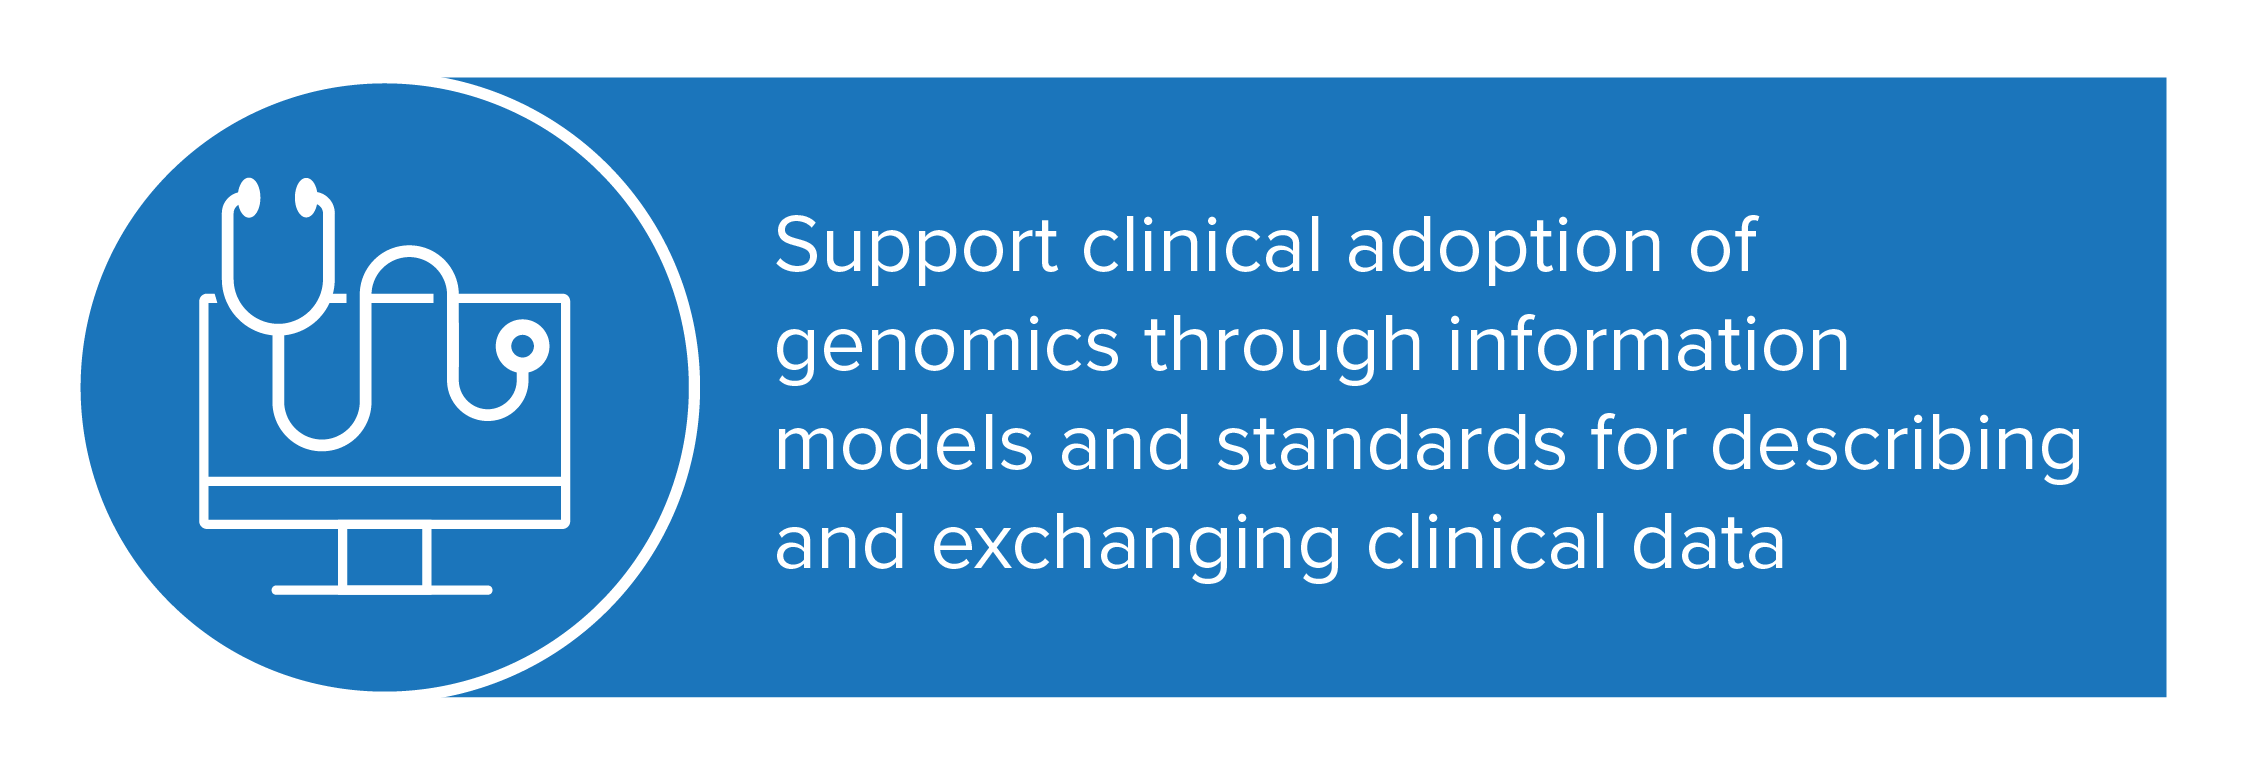 The Clinical and Phenotypic Data Capture Work Stream supports clinical adoption of genomics through information models and standards for describing and exchanging clinical data.